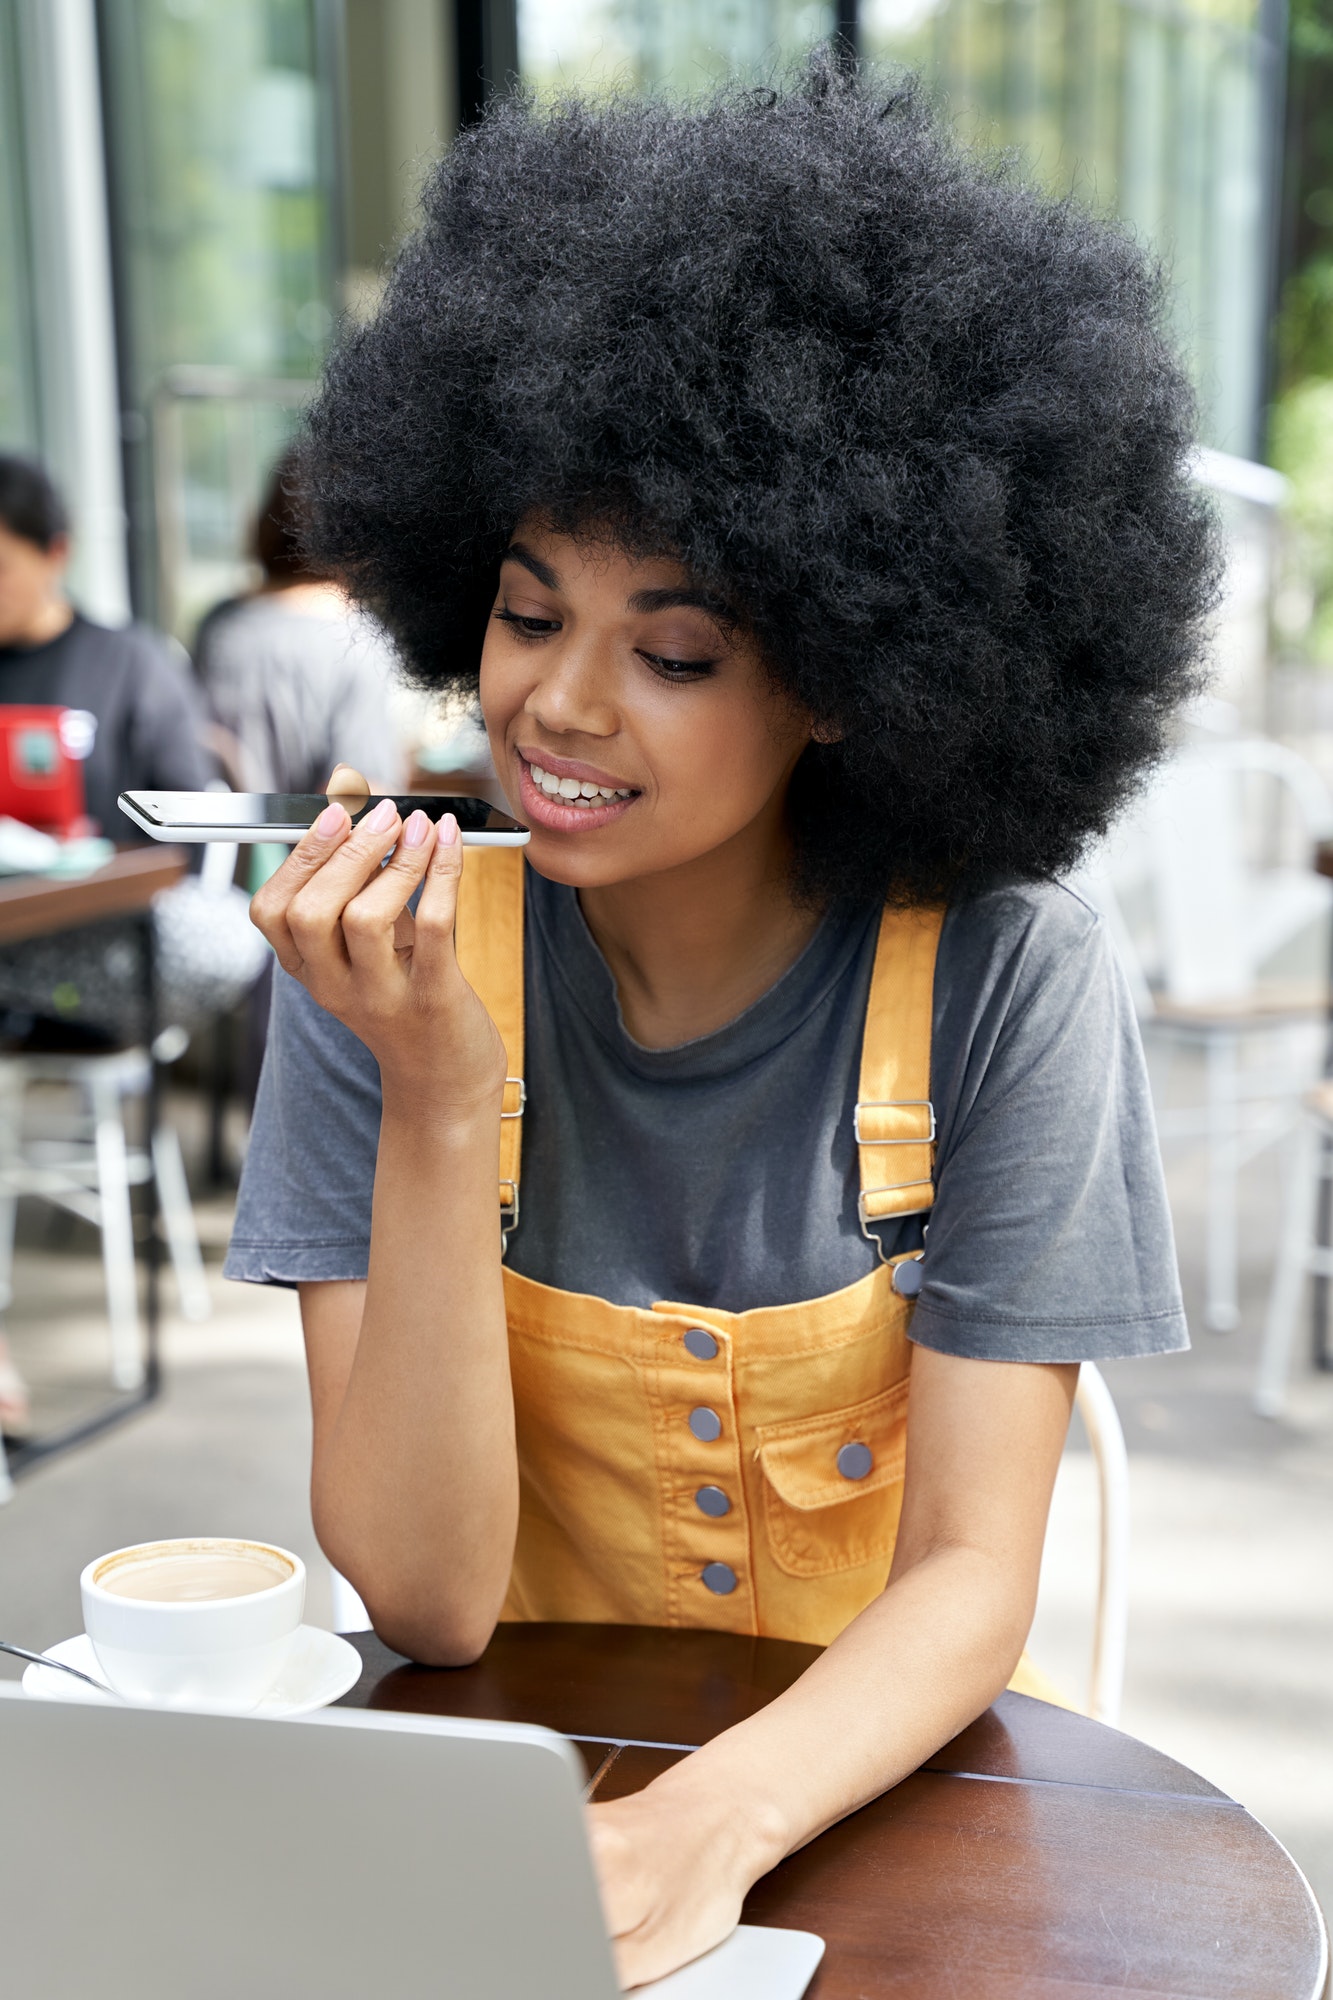 African woman using mobile voice recognition assistant sitting in outdoor cafe.